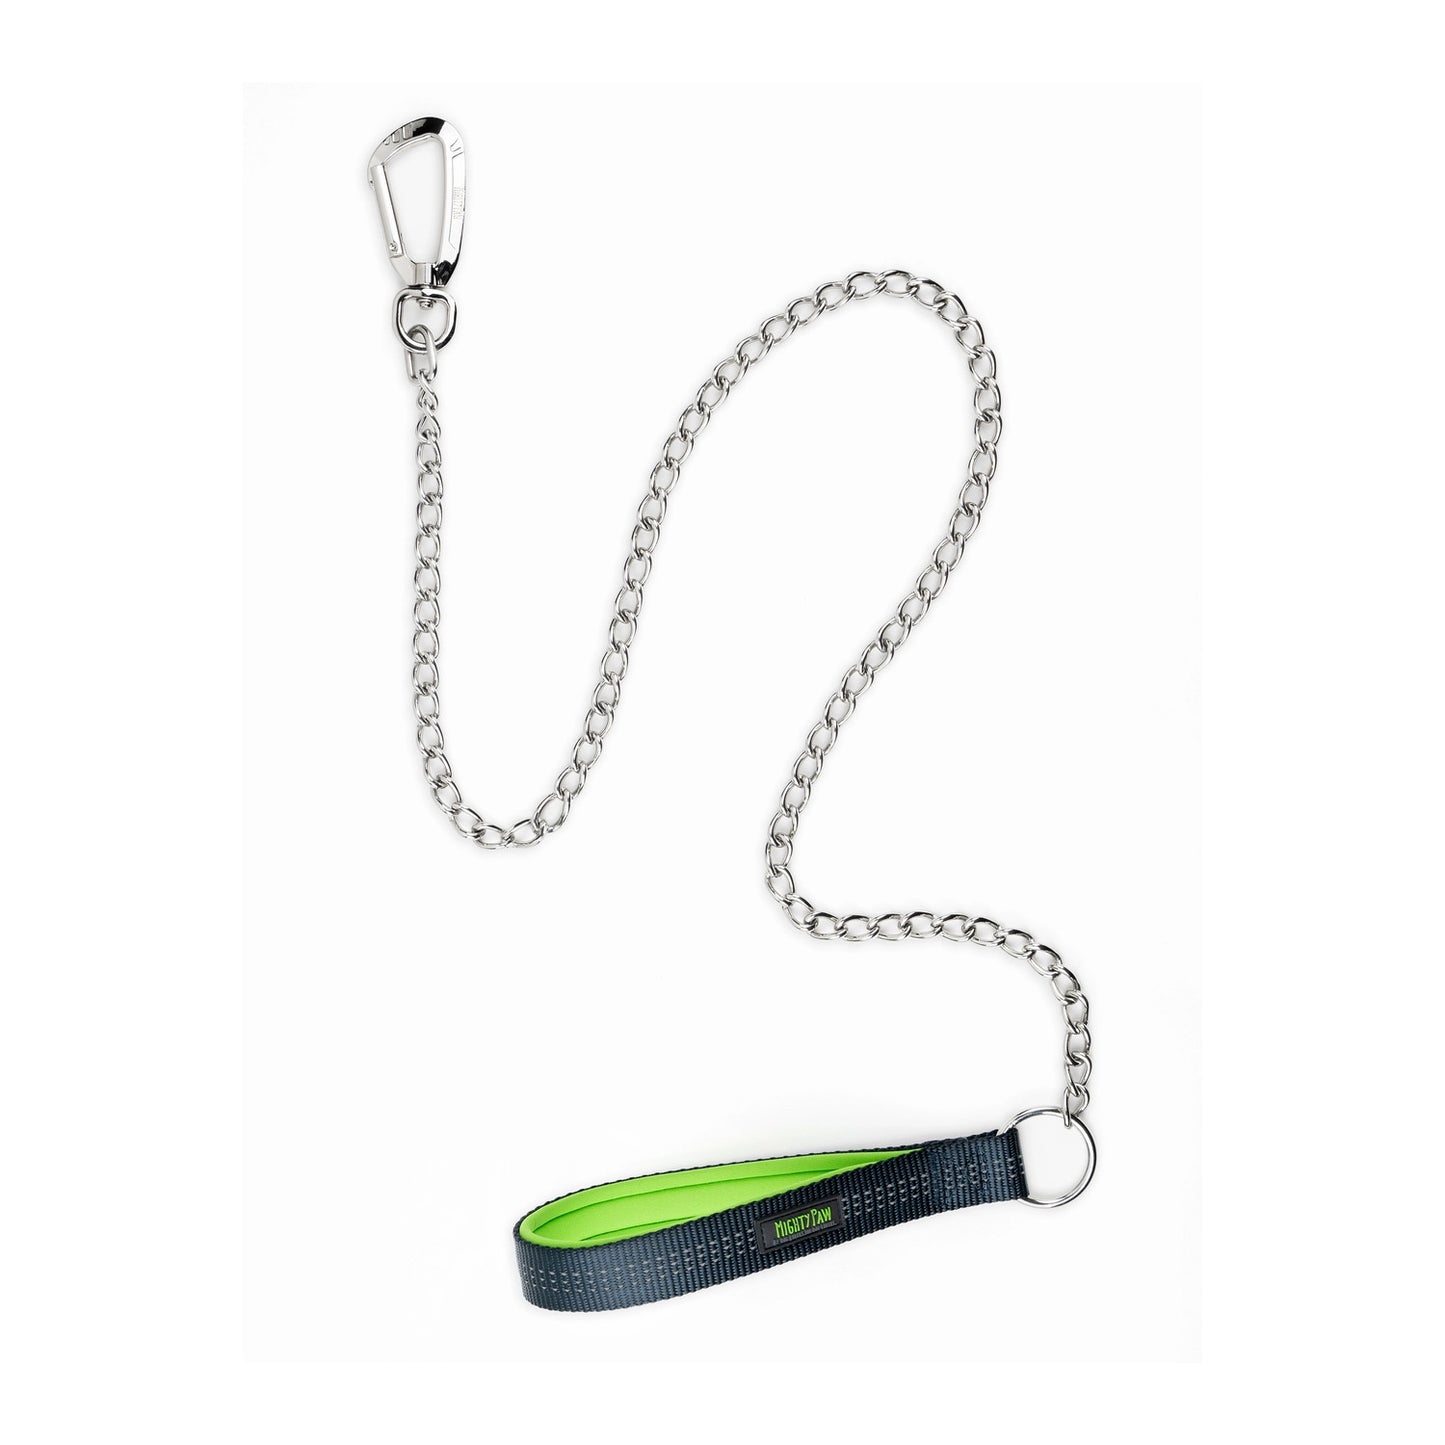 Chain Dog Leash Green by Mighty Paw